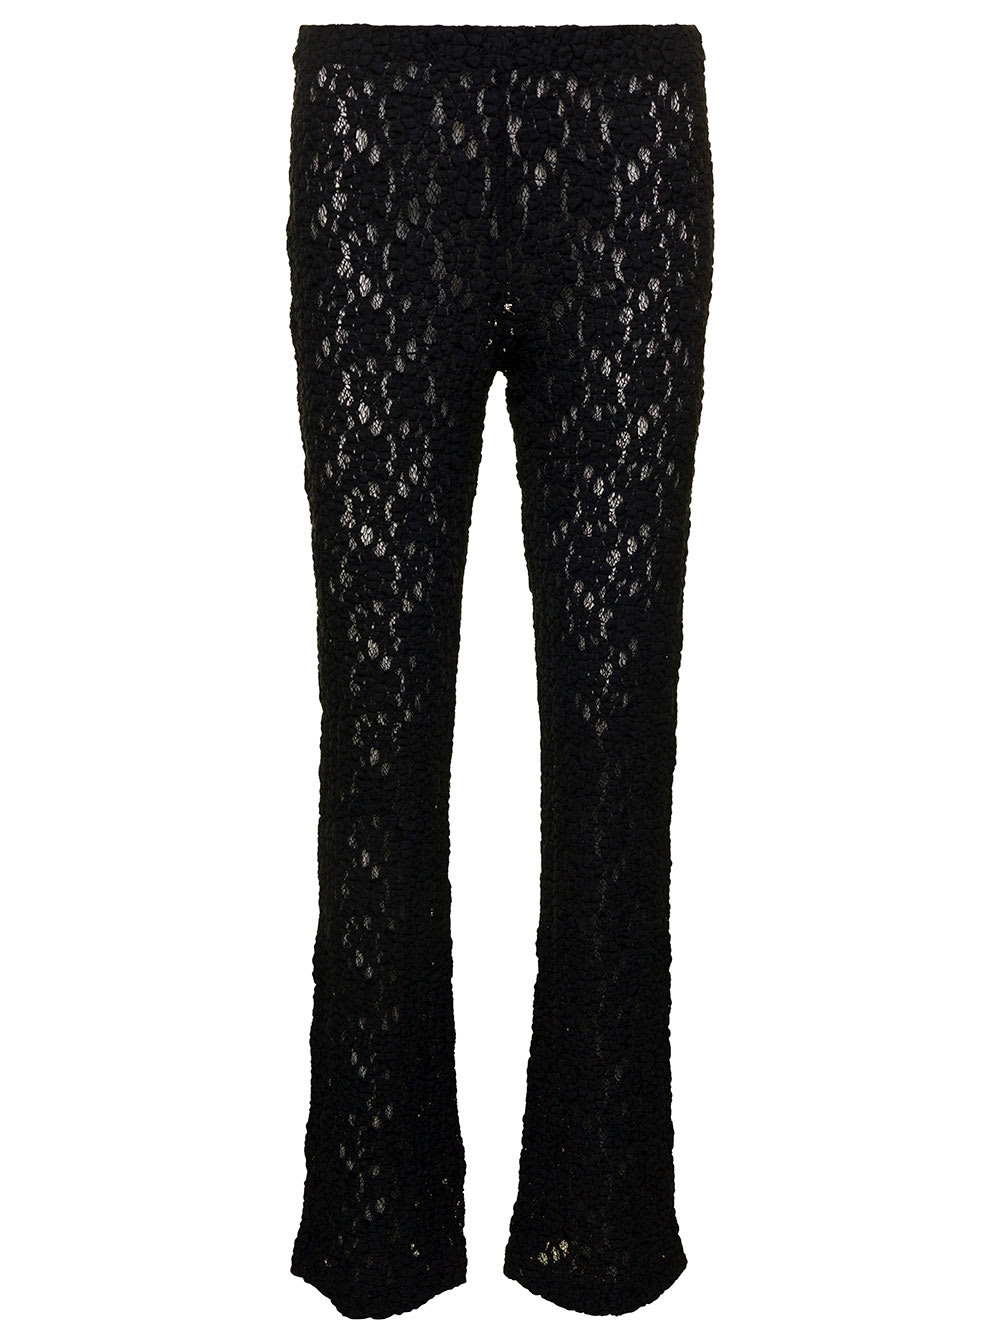 CHLOÉ BLACK FLARE PANTS WITH ELASTIC WAISTBAND IN FLOREAL LACE WOMAN